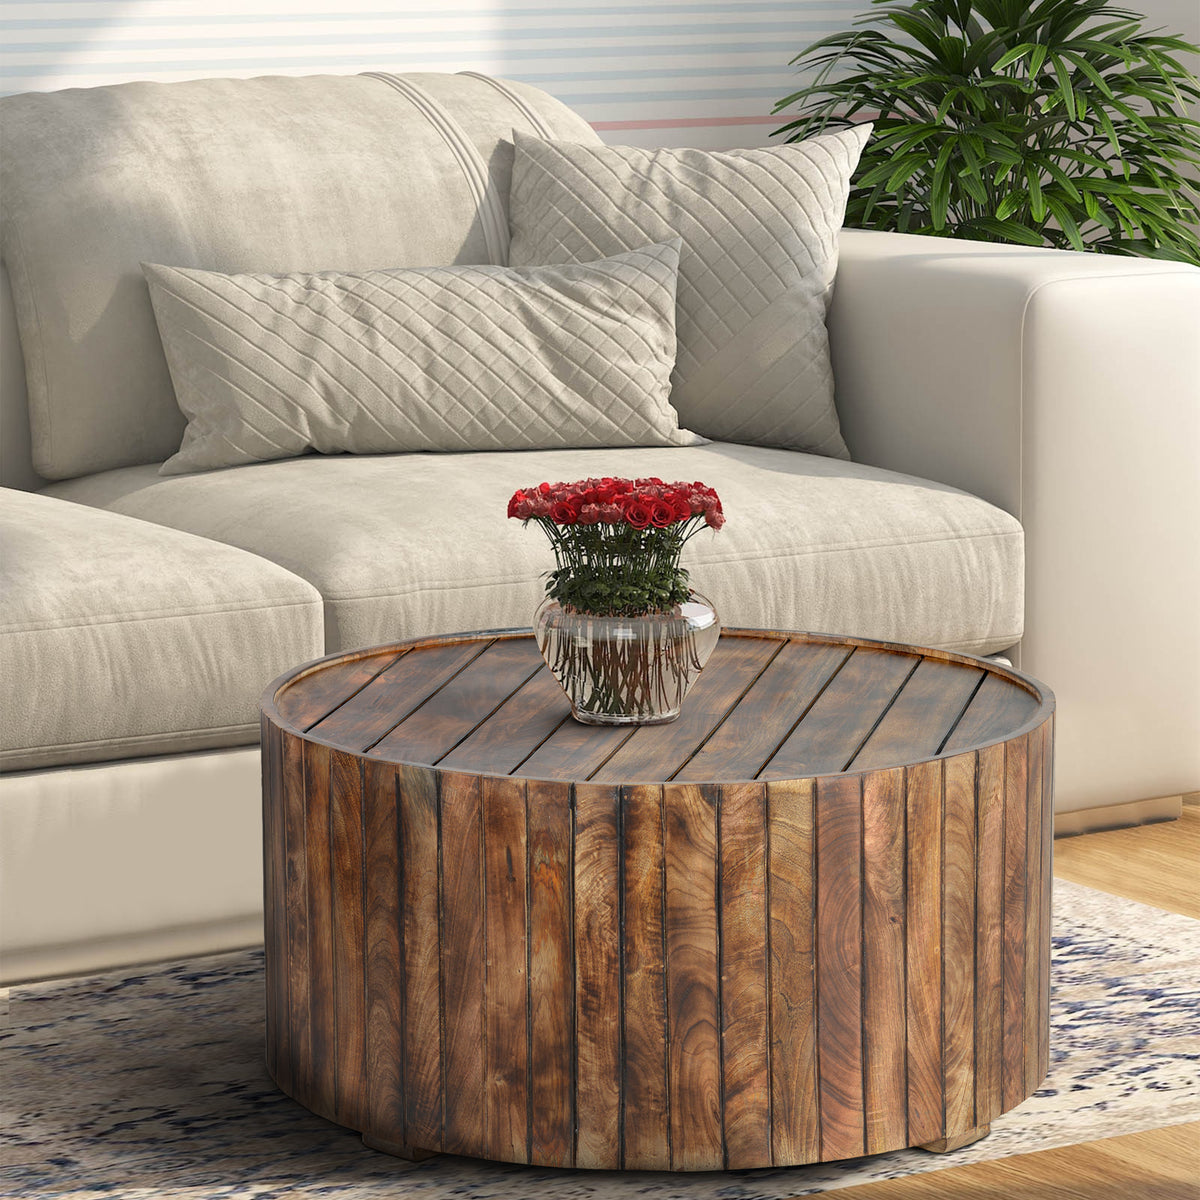 34 Inch Handmade Wooden Round Coffee Table with Plank Design, Burned Brown - UPT-204785